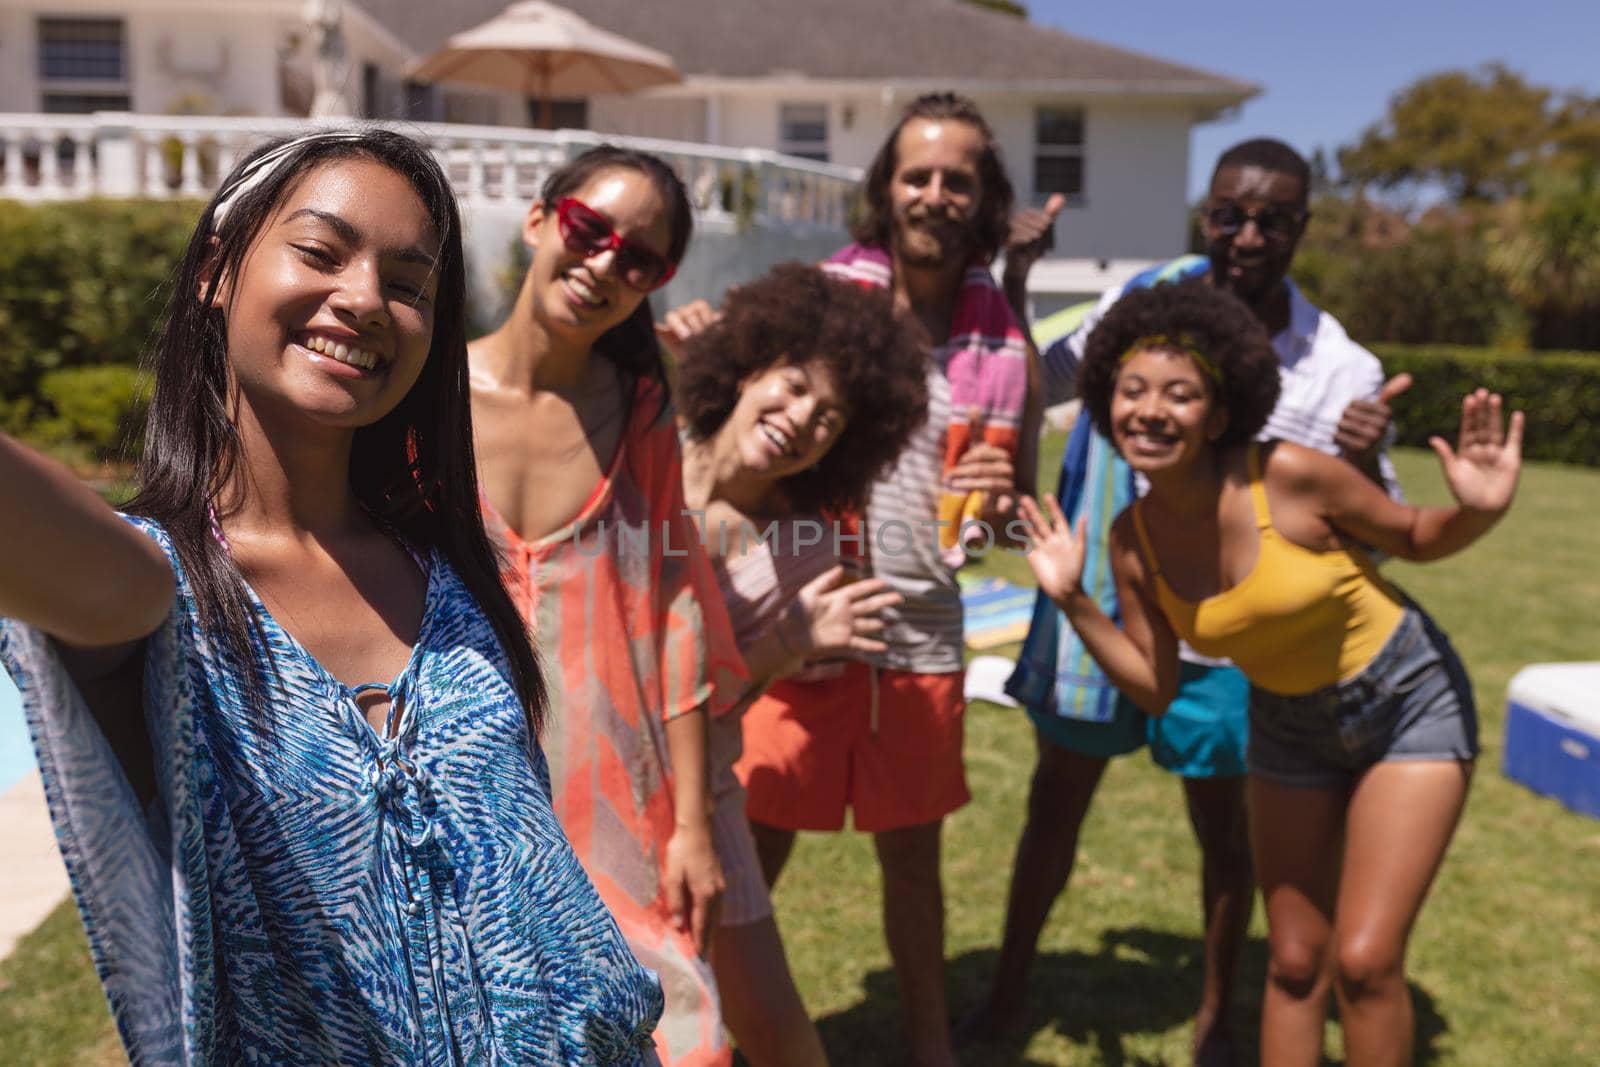 Portrait of diverse group of friends taking selfie at a pool party. Hanging out and relaxing outdoors in summer.